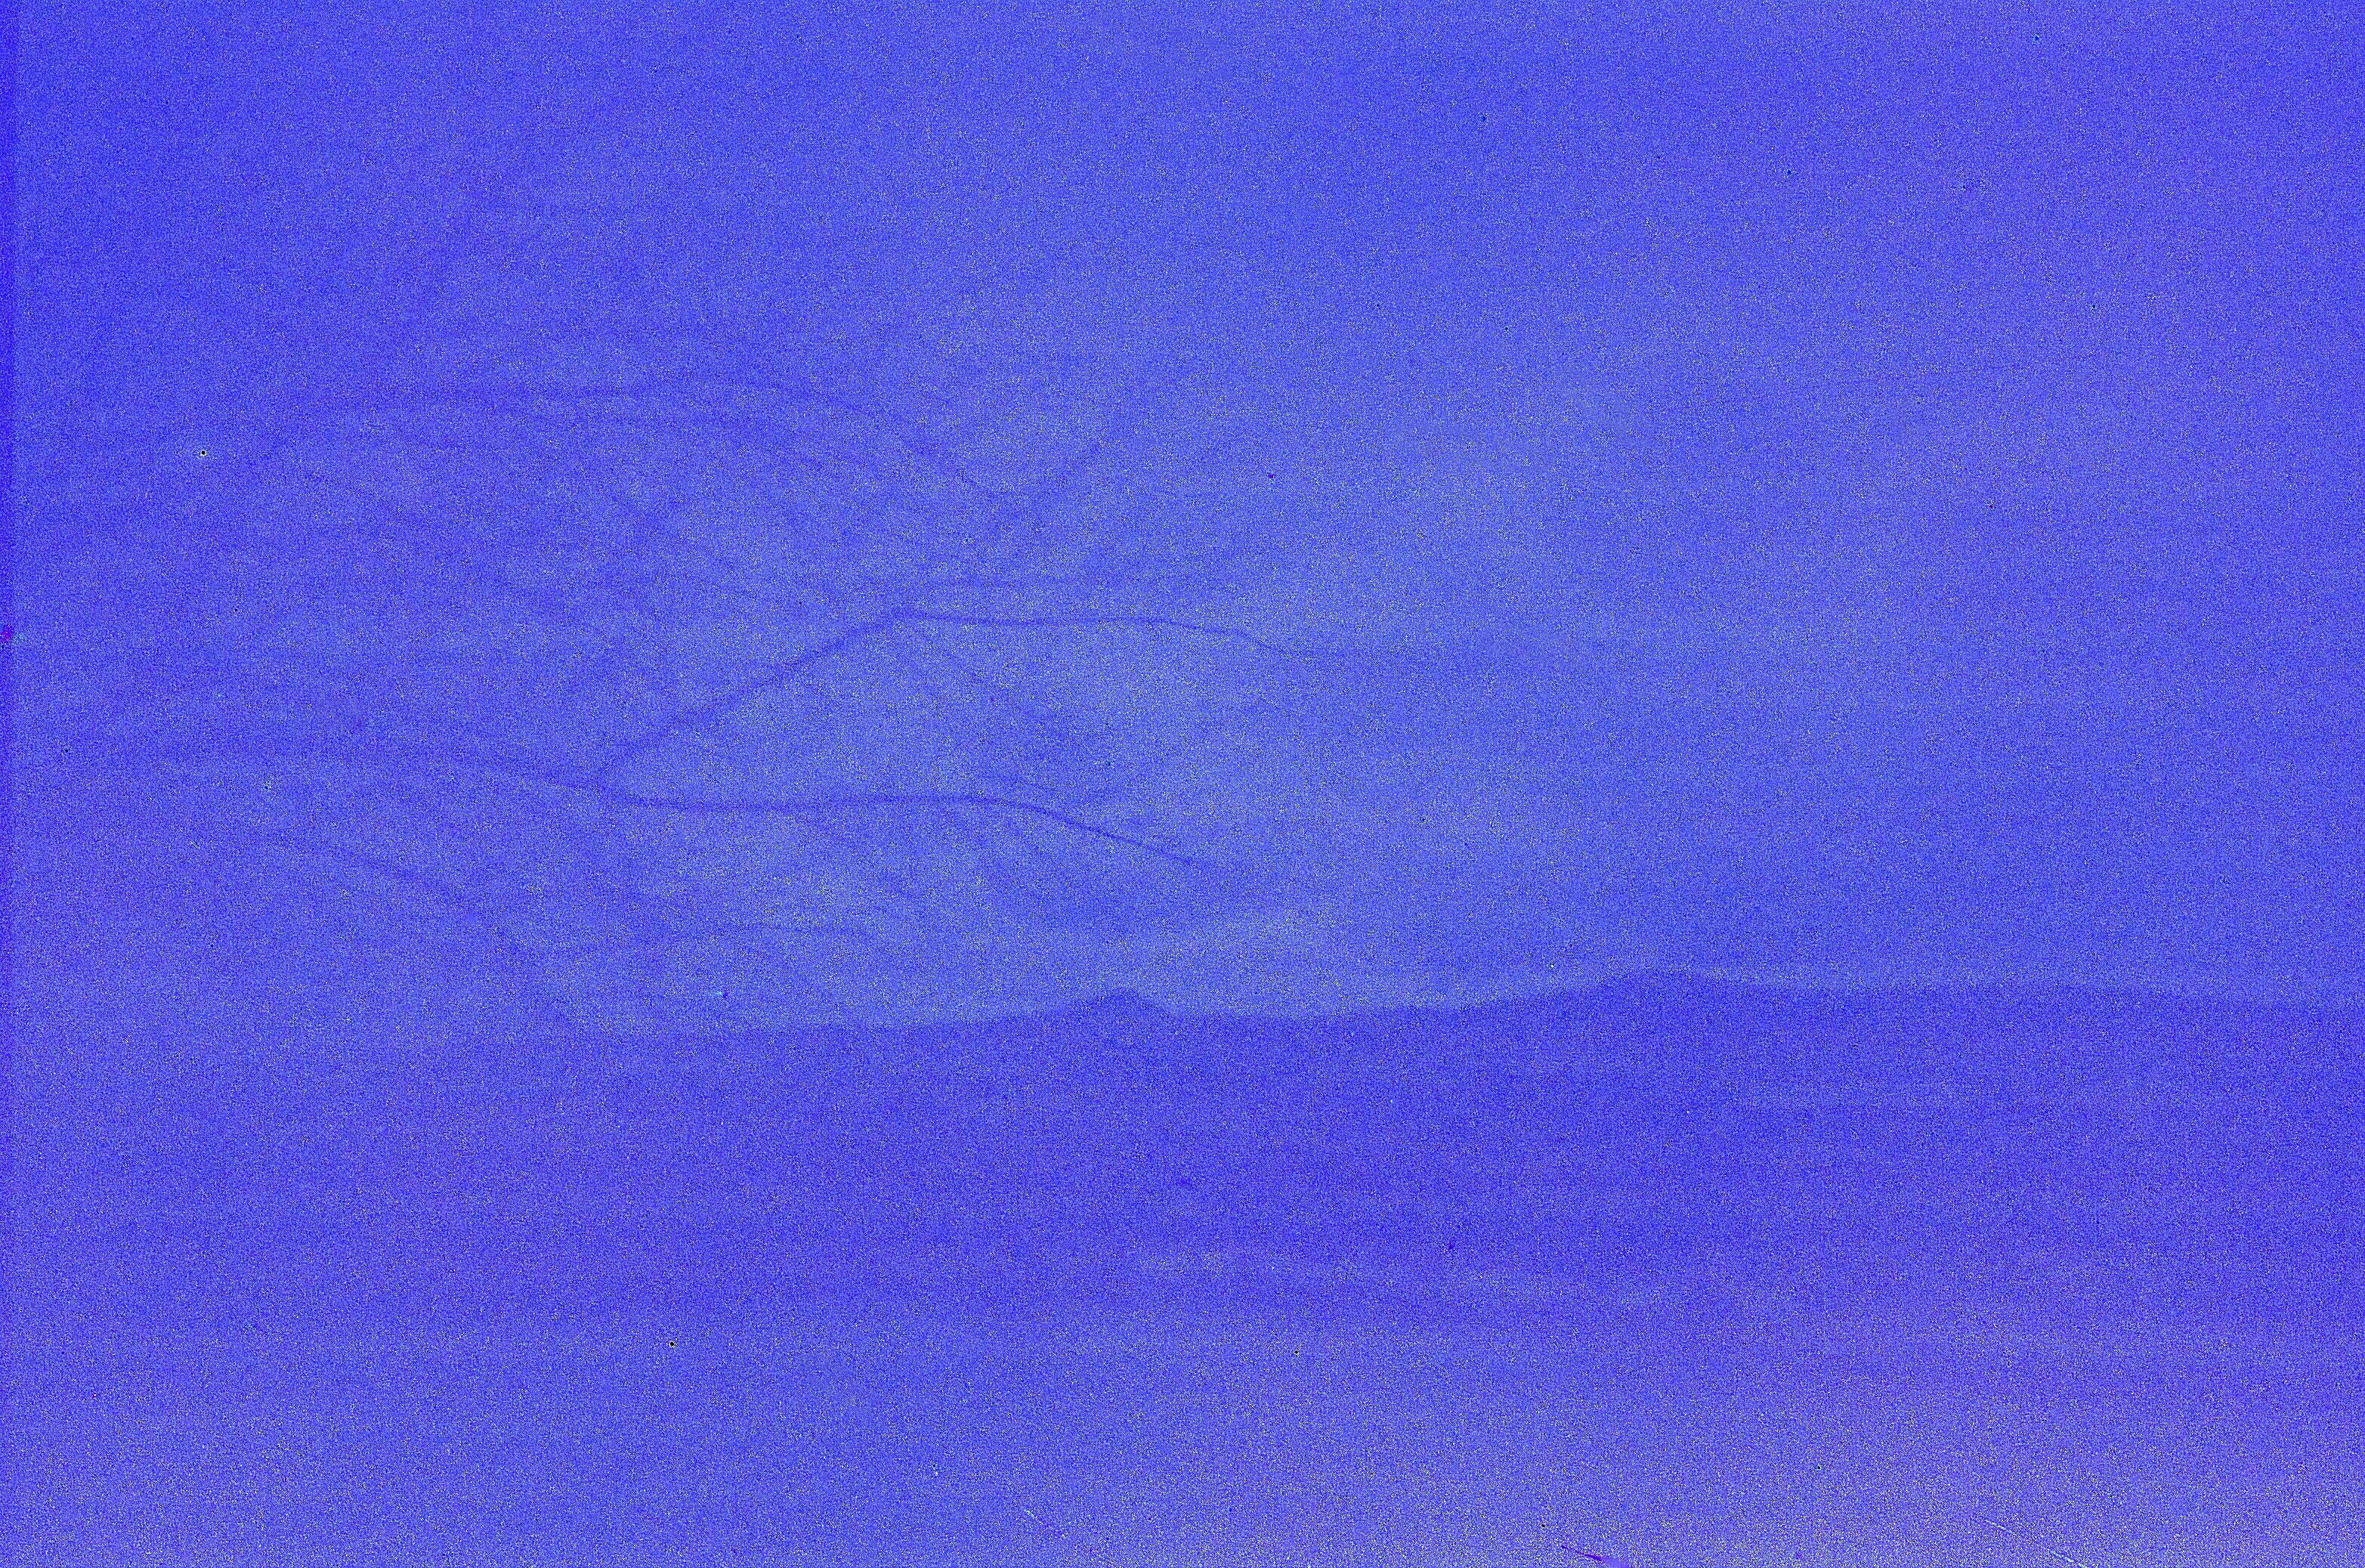 Dim blue picture of a landscape on a cloudy day. The left half of the frame is taken up by a tree.